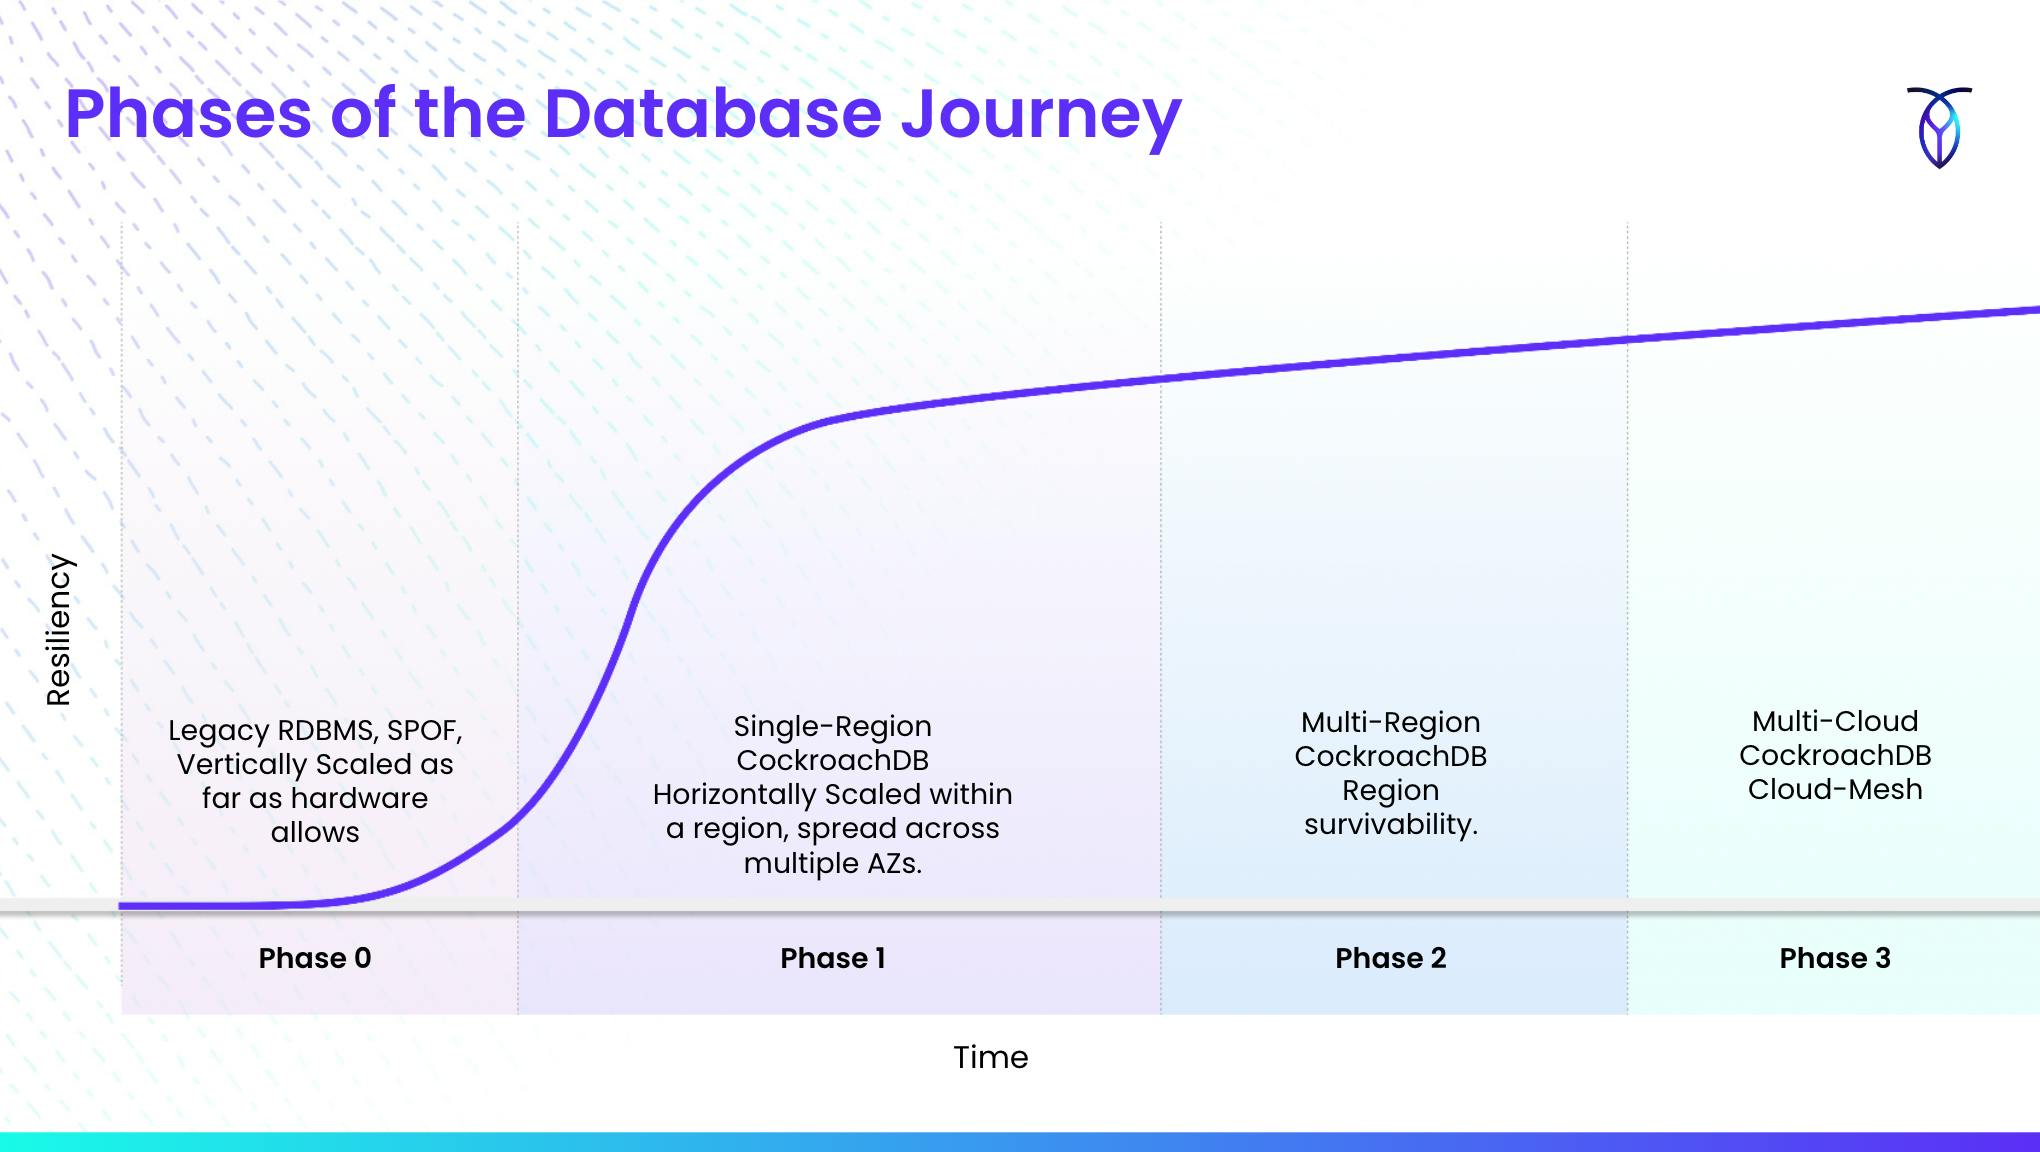 four phases of the database journey, from legacy on-prem to distributed single region cloud to multi-region cloud to multi-cloud